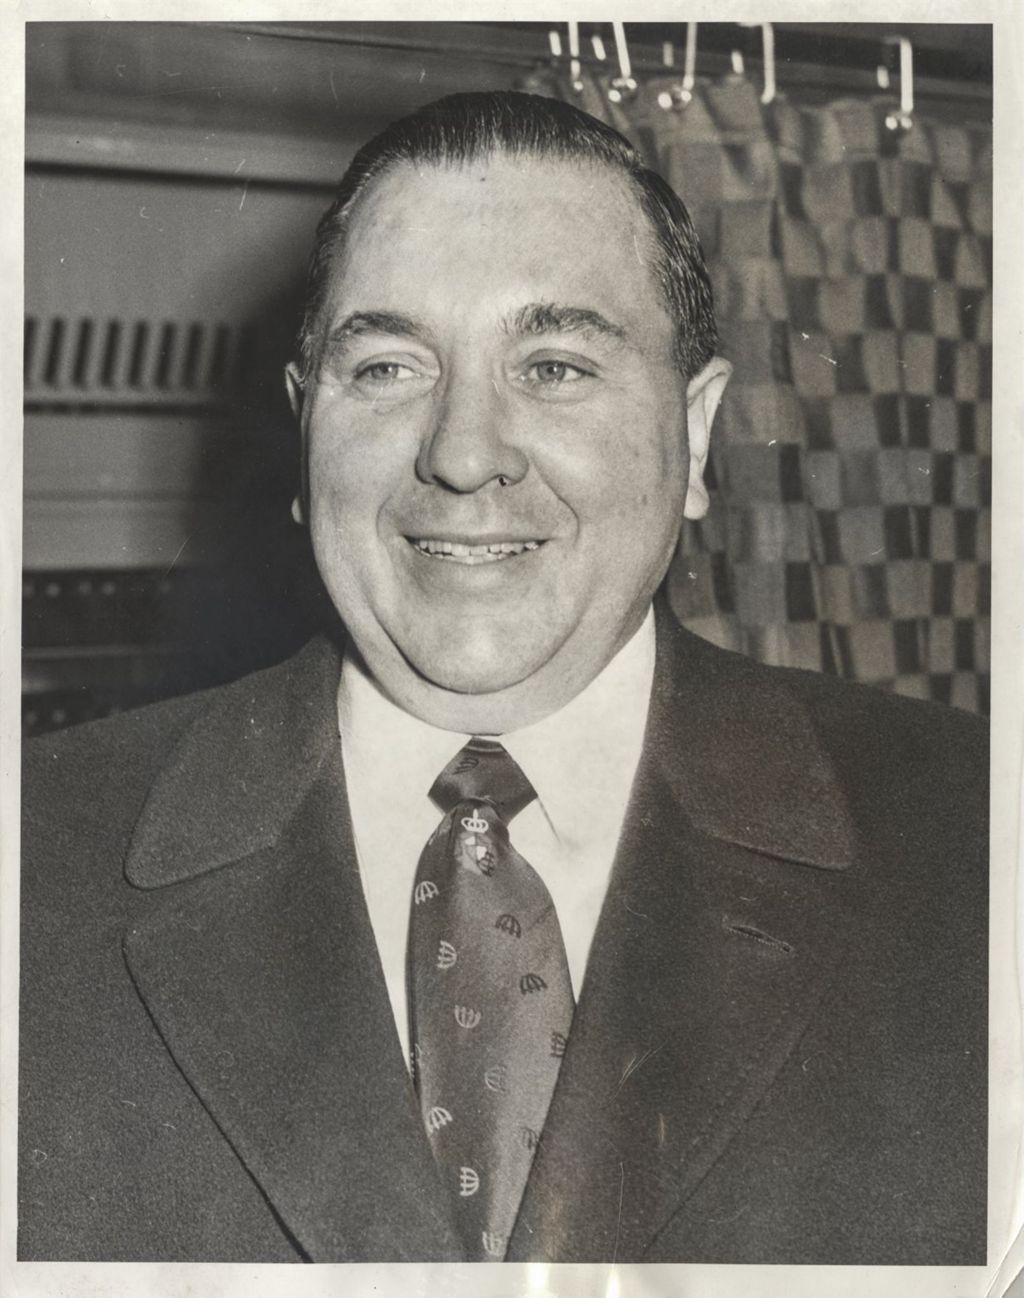 Miniature of Richard J. Daley in front of a voting booth